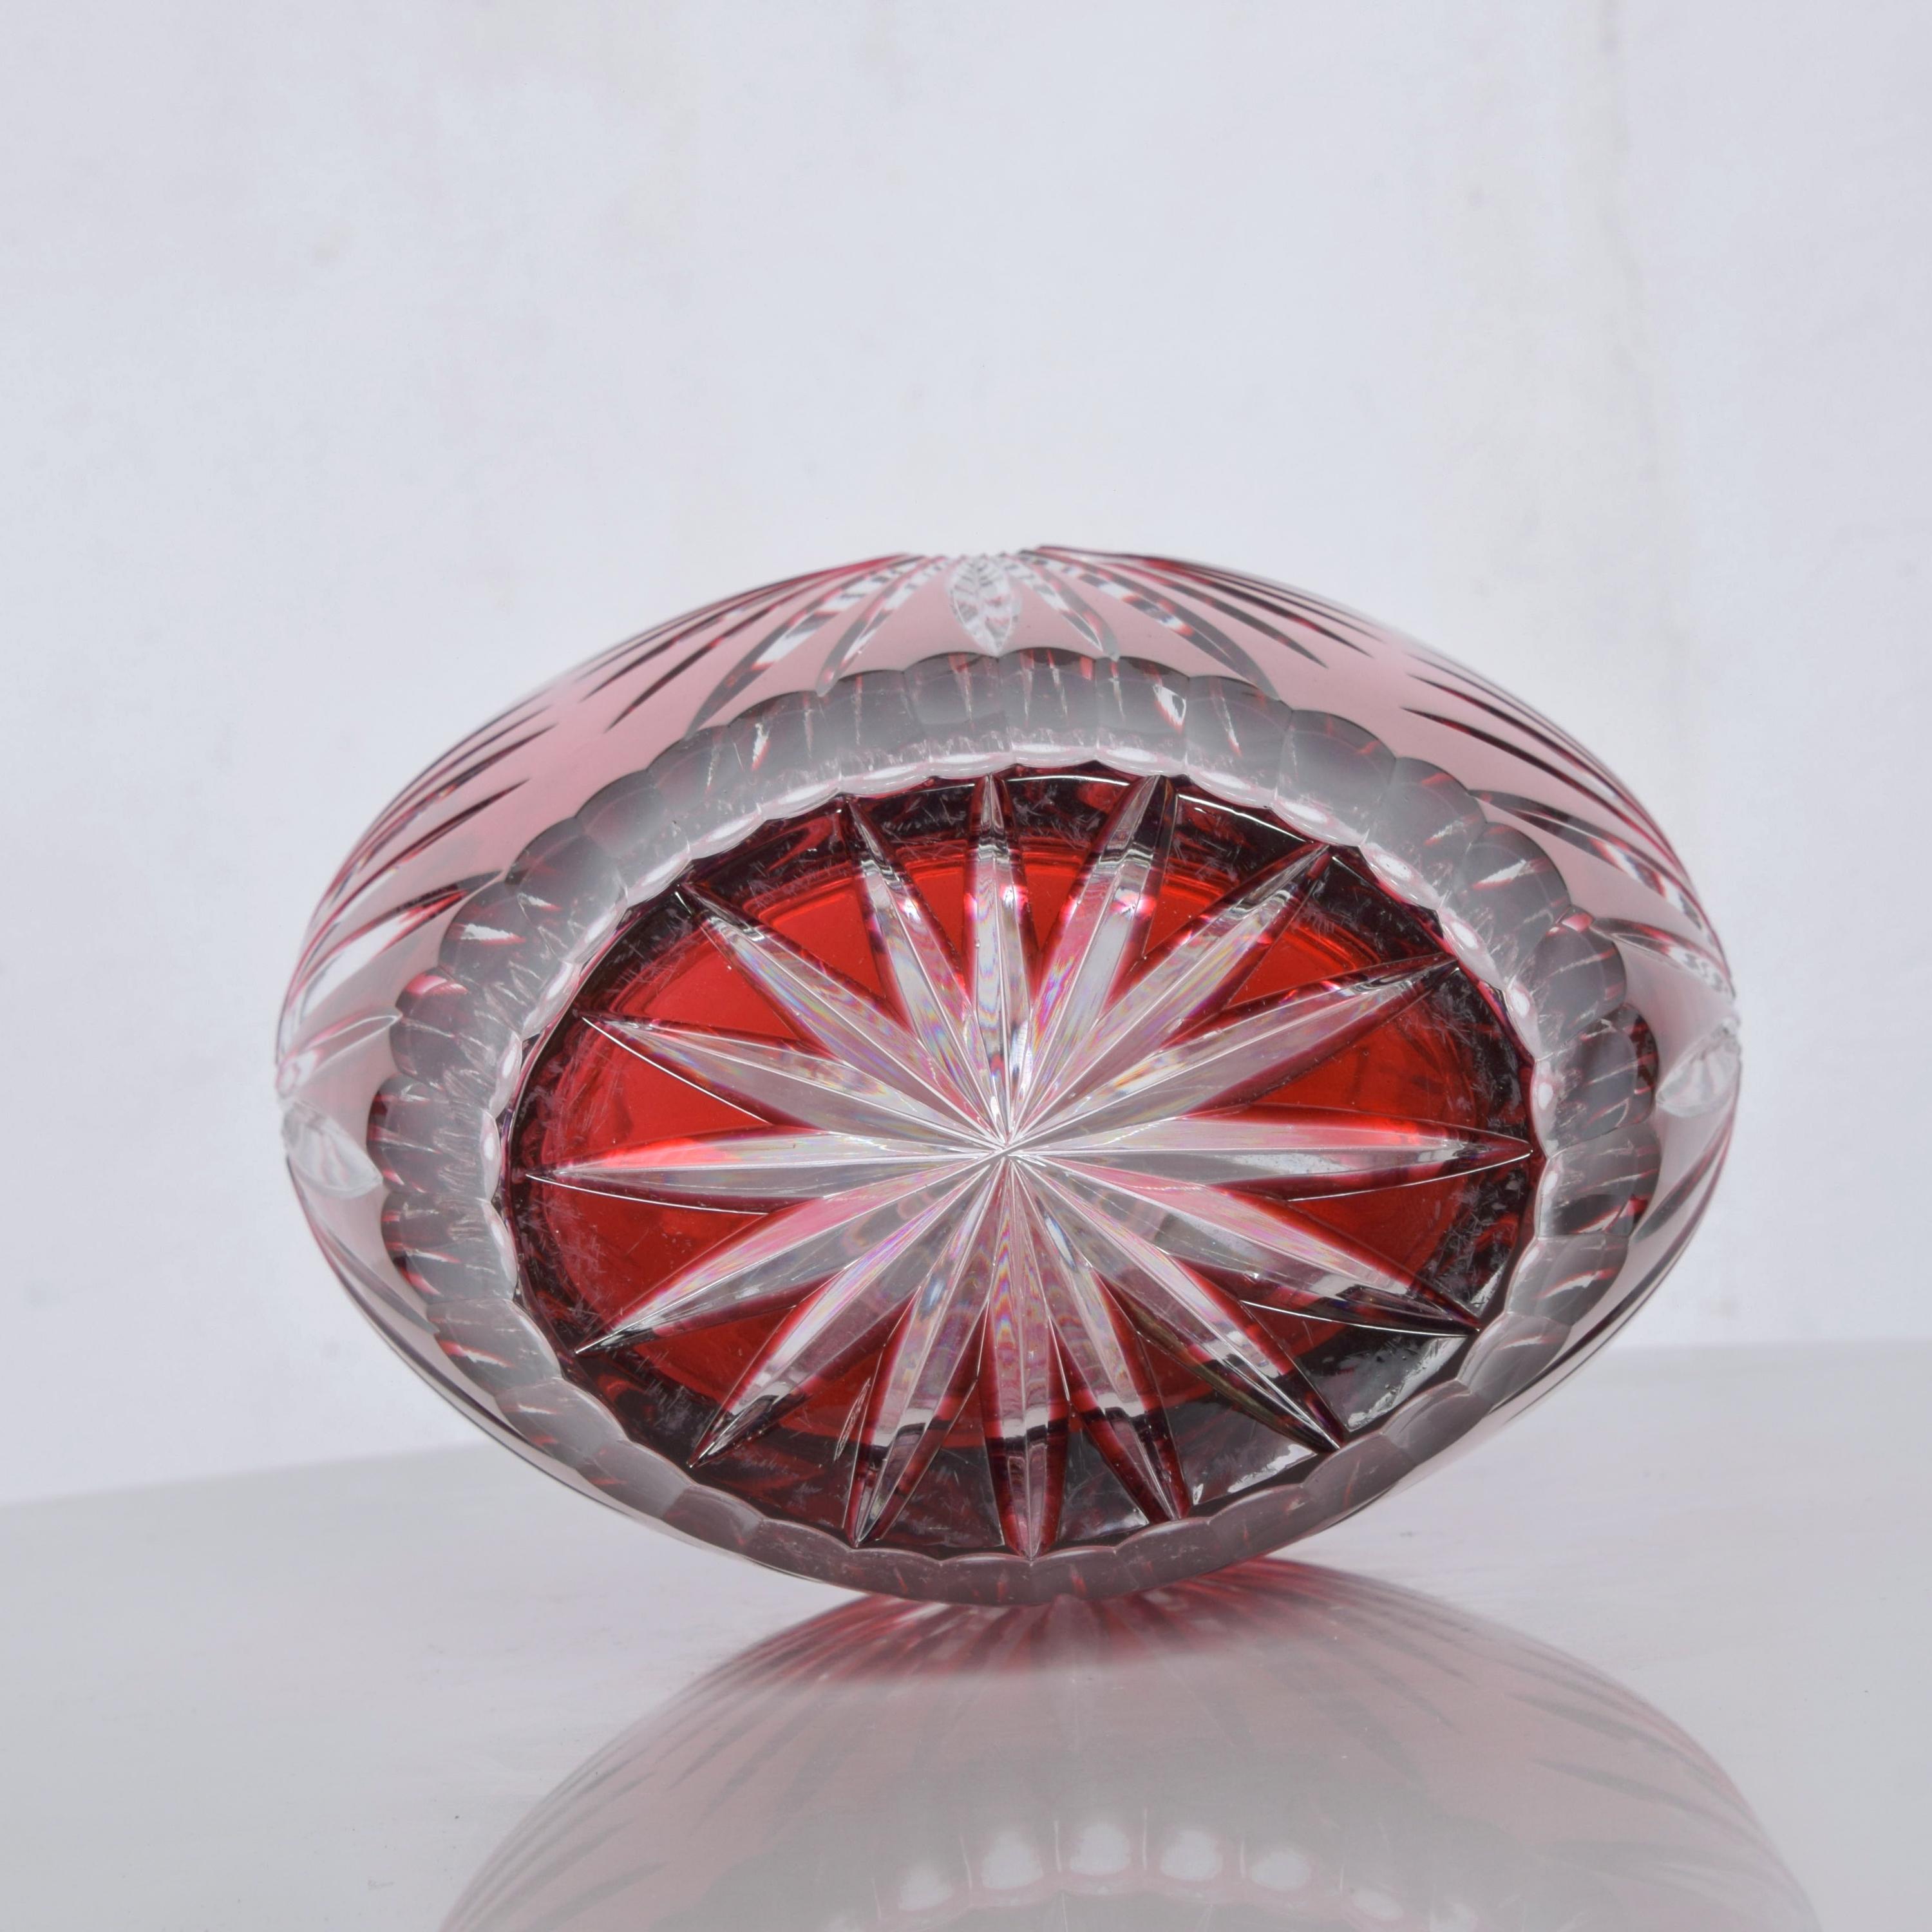 Bohemian Red Ruby Cut Clear Crystal Glass Vase Hungary Czech Art Style of Ajka 1